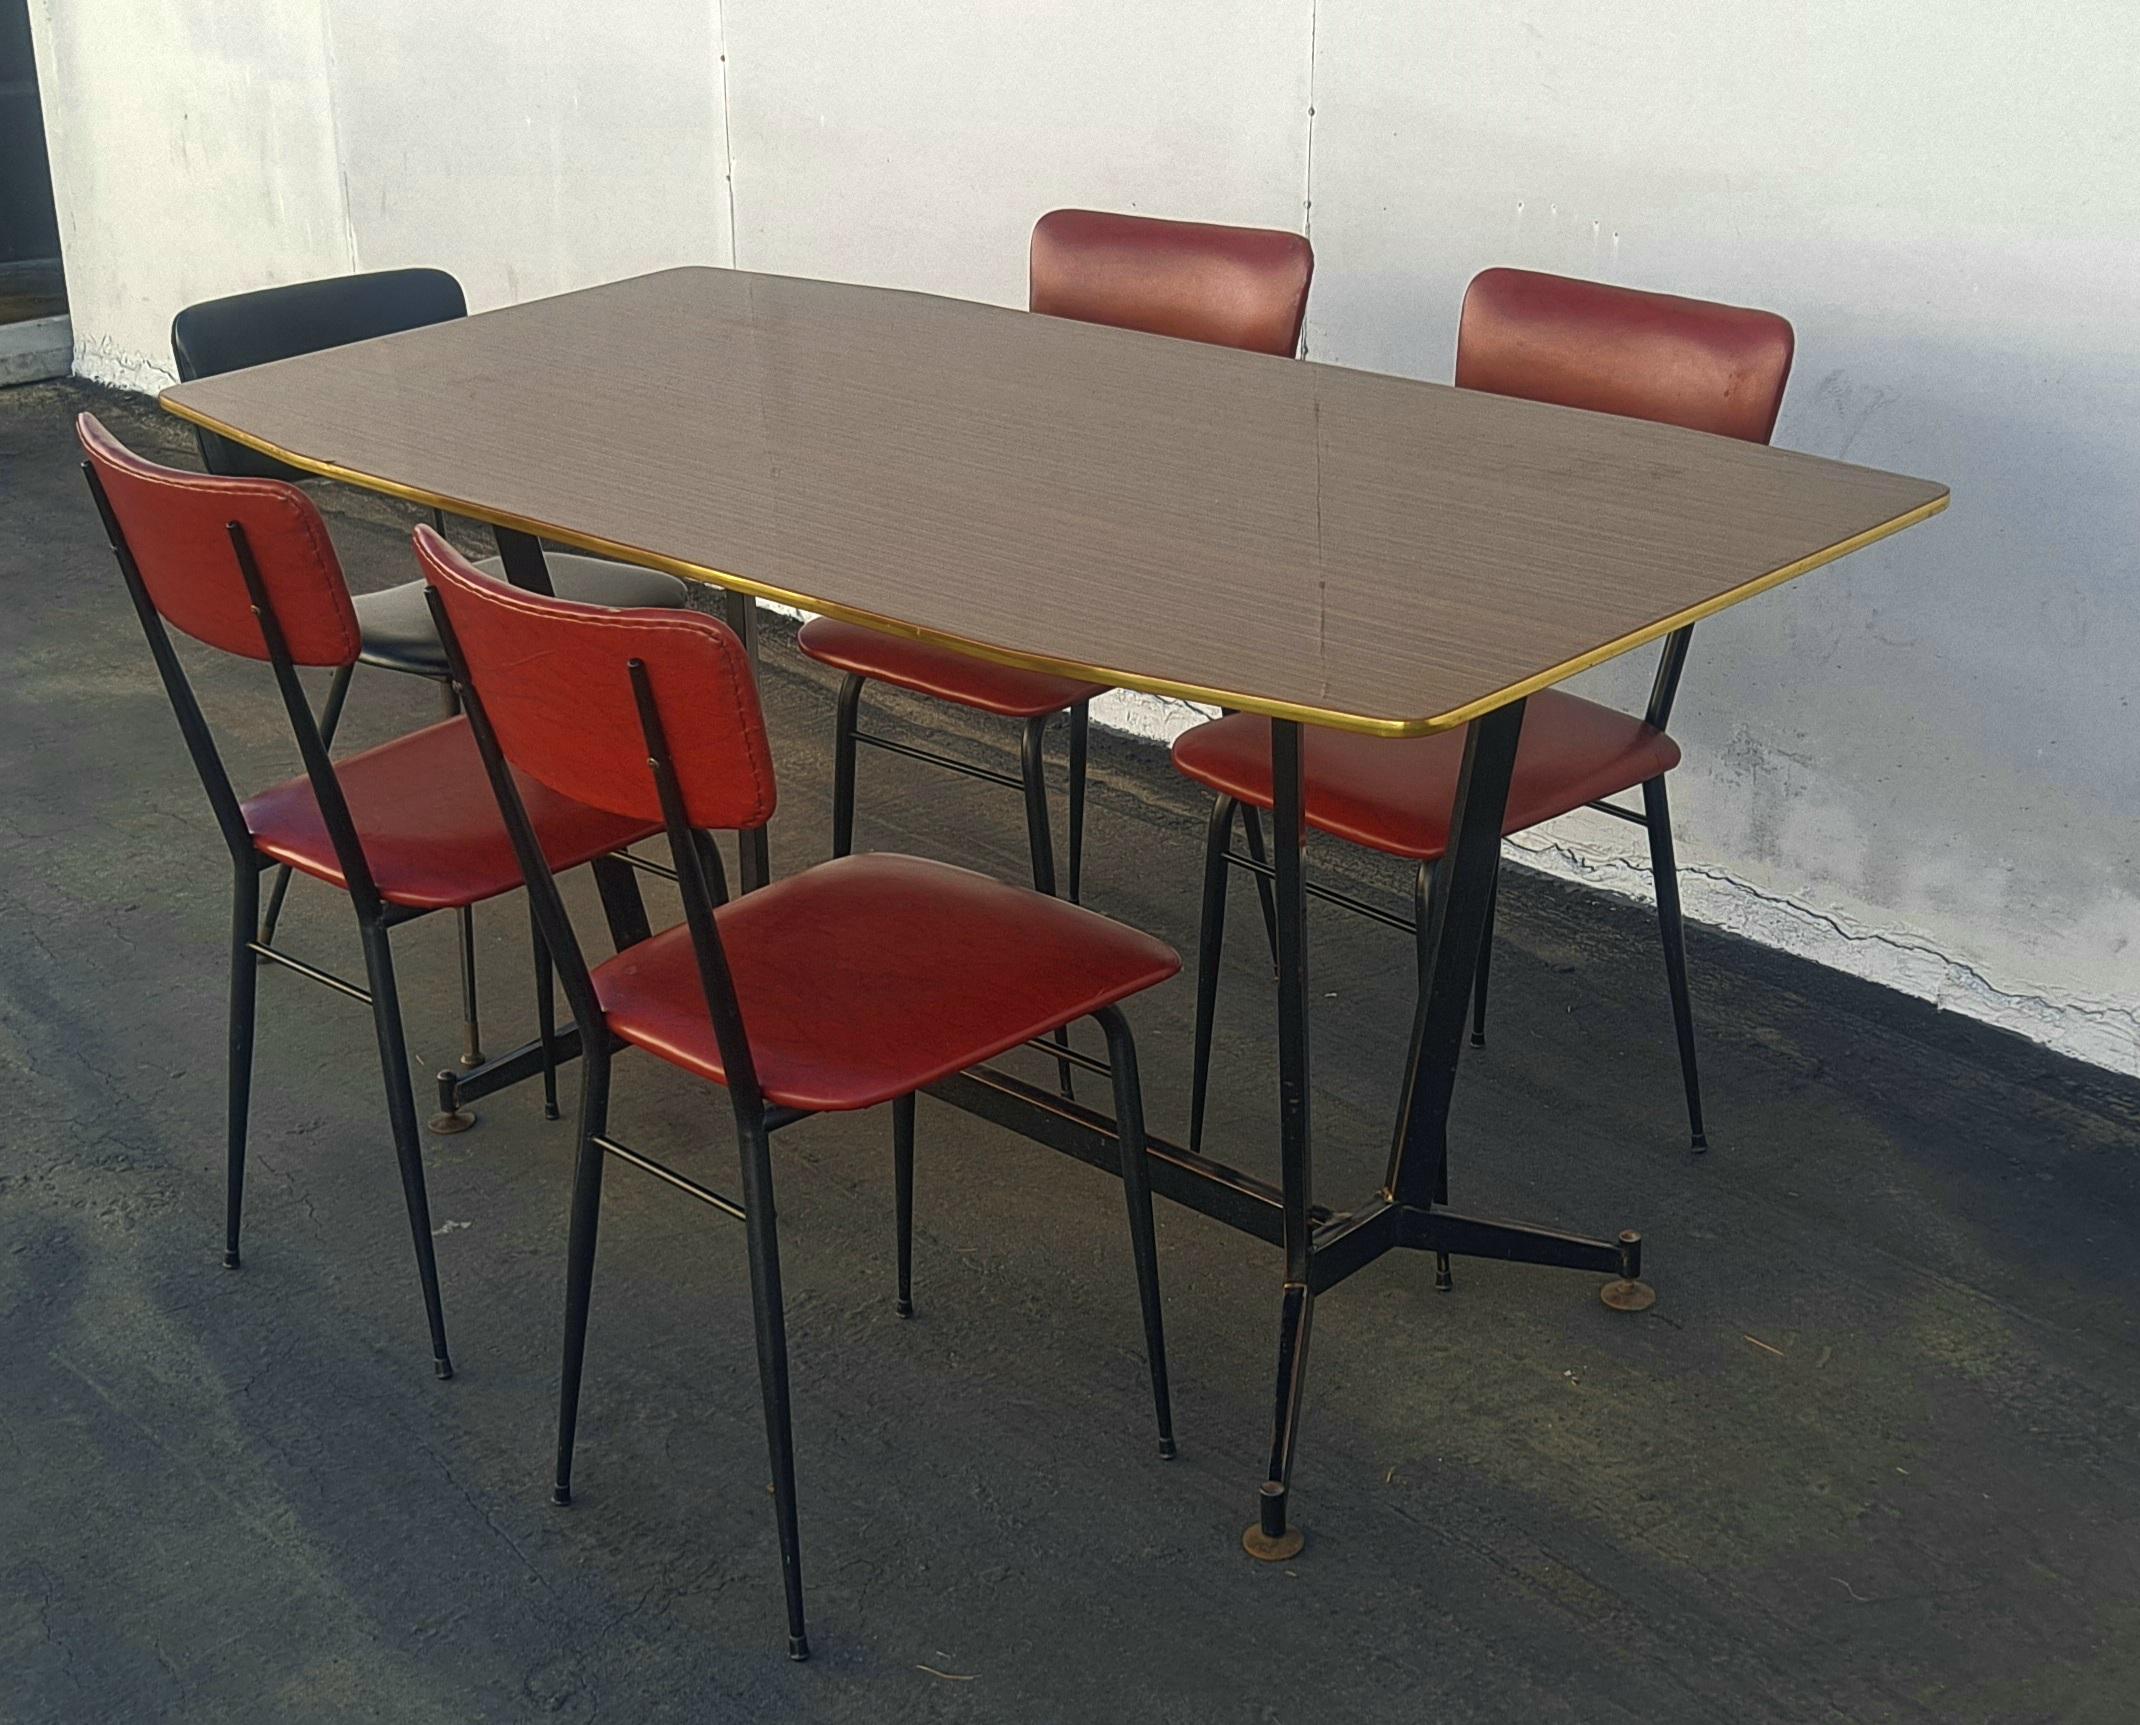 An original 1960's Italian table with 5 chairs. Iron base with brass boots and special Formica top. Overall, a unique dinning room set.